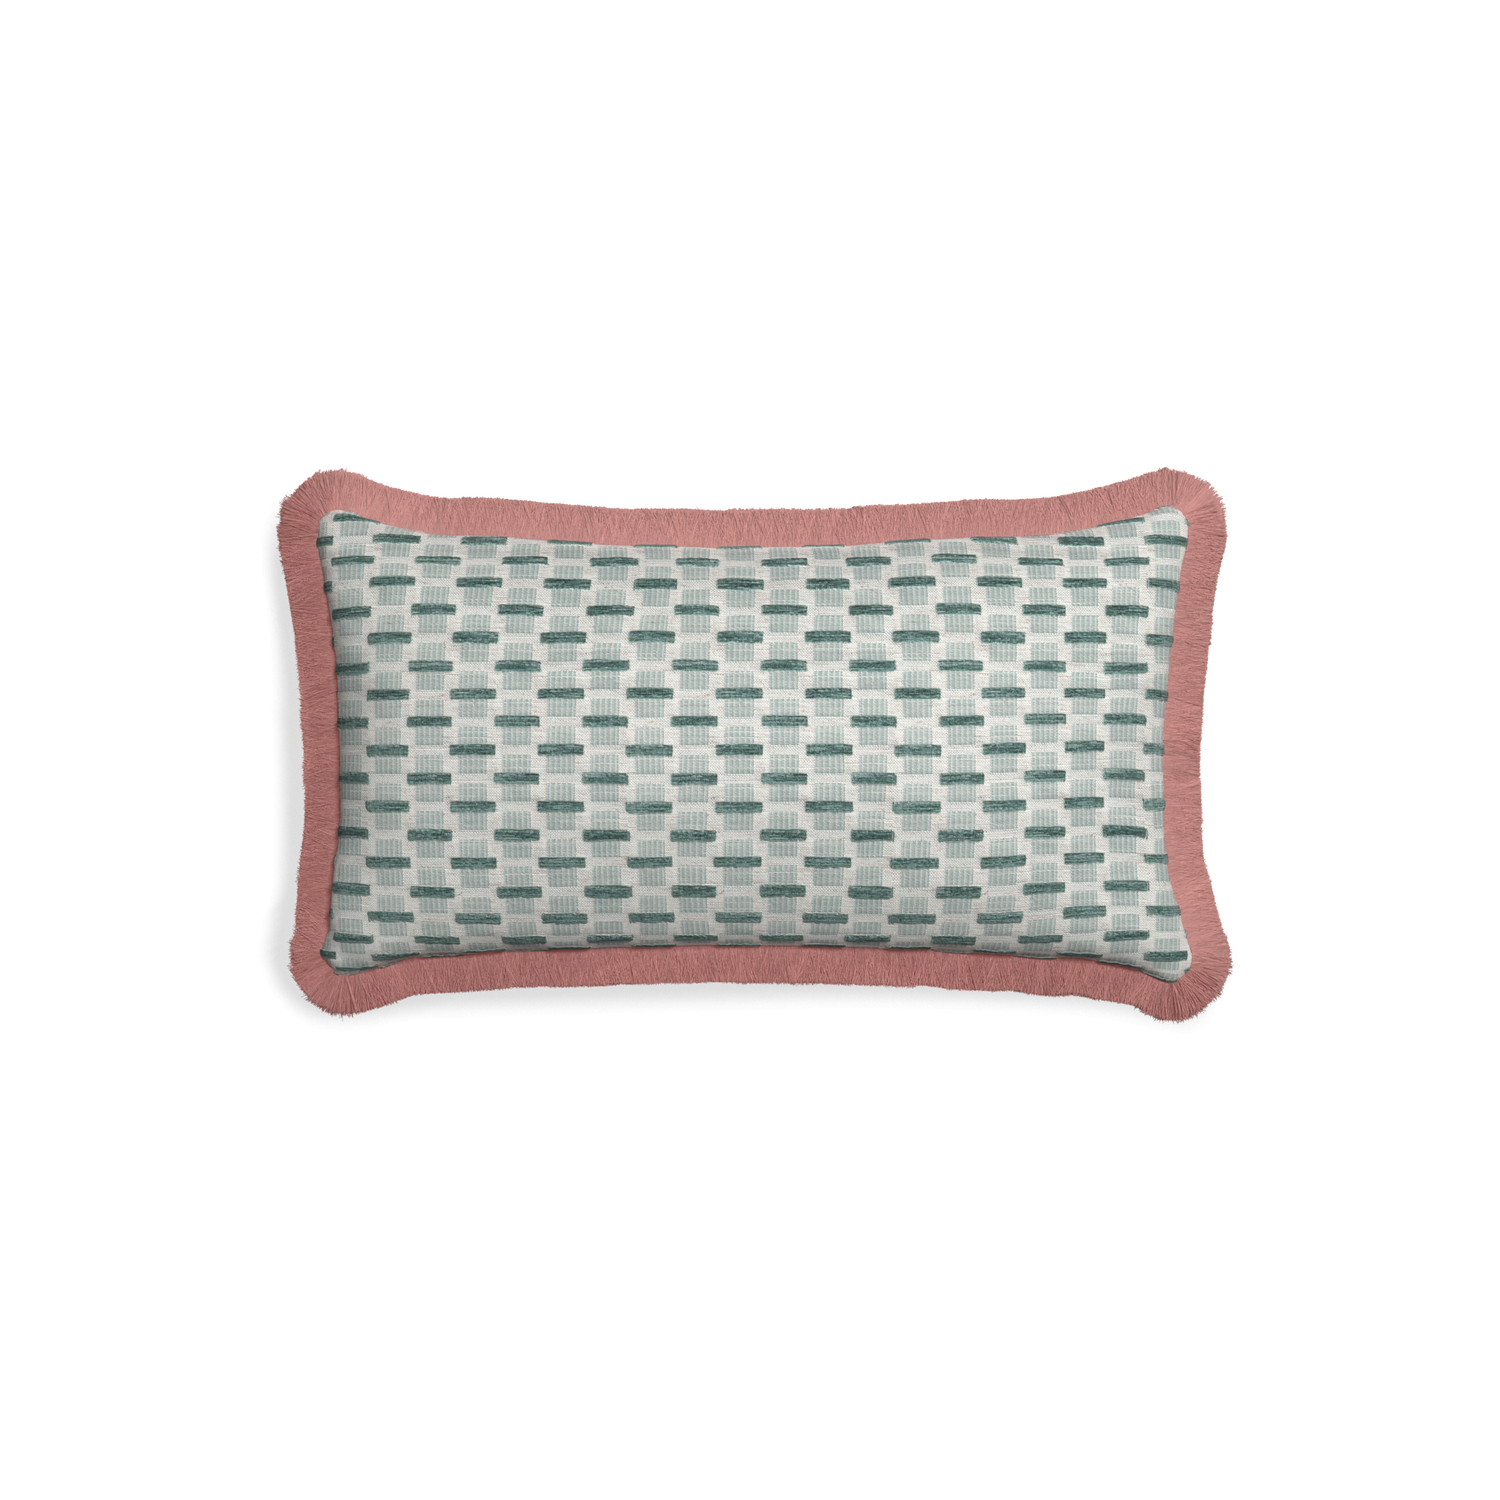 Petite-lumbar willow mint custom green geometric chenillepillow with d fringe on white background